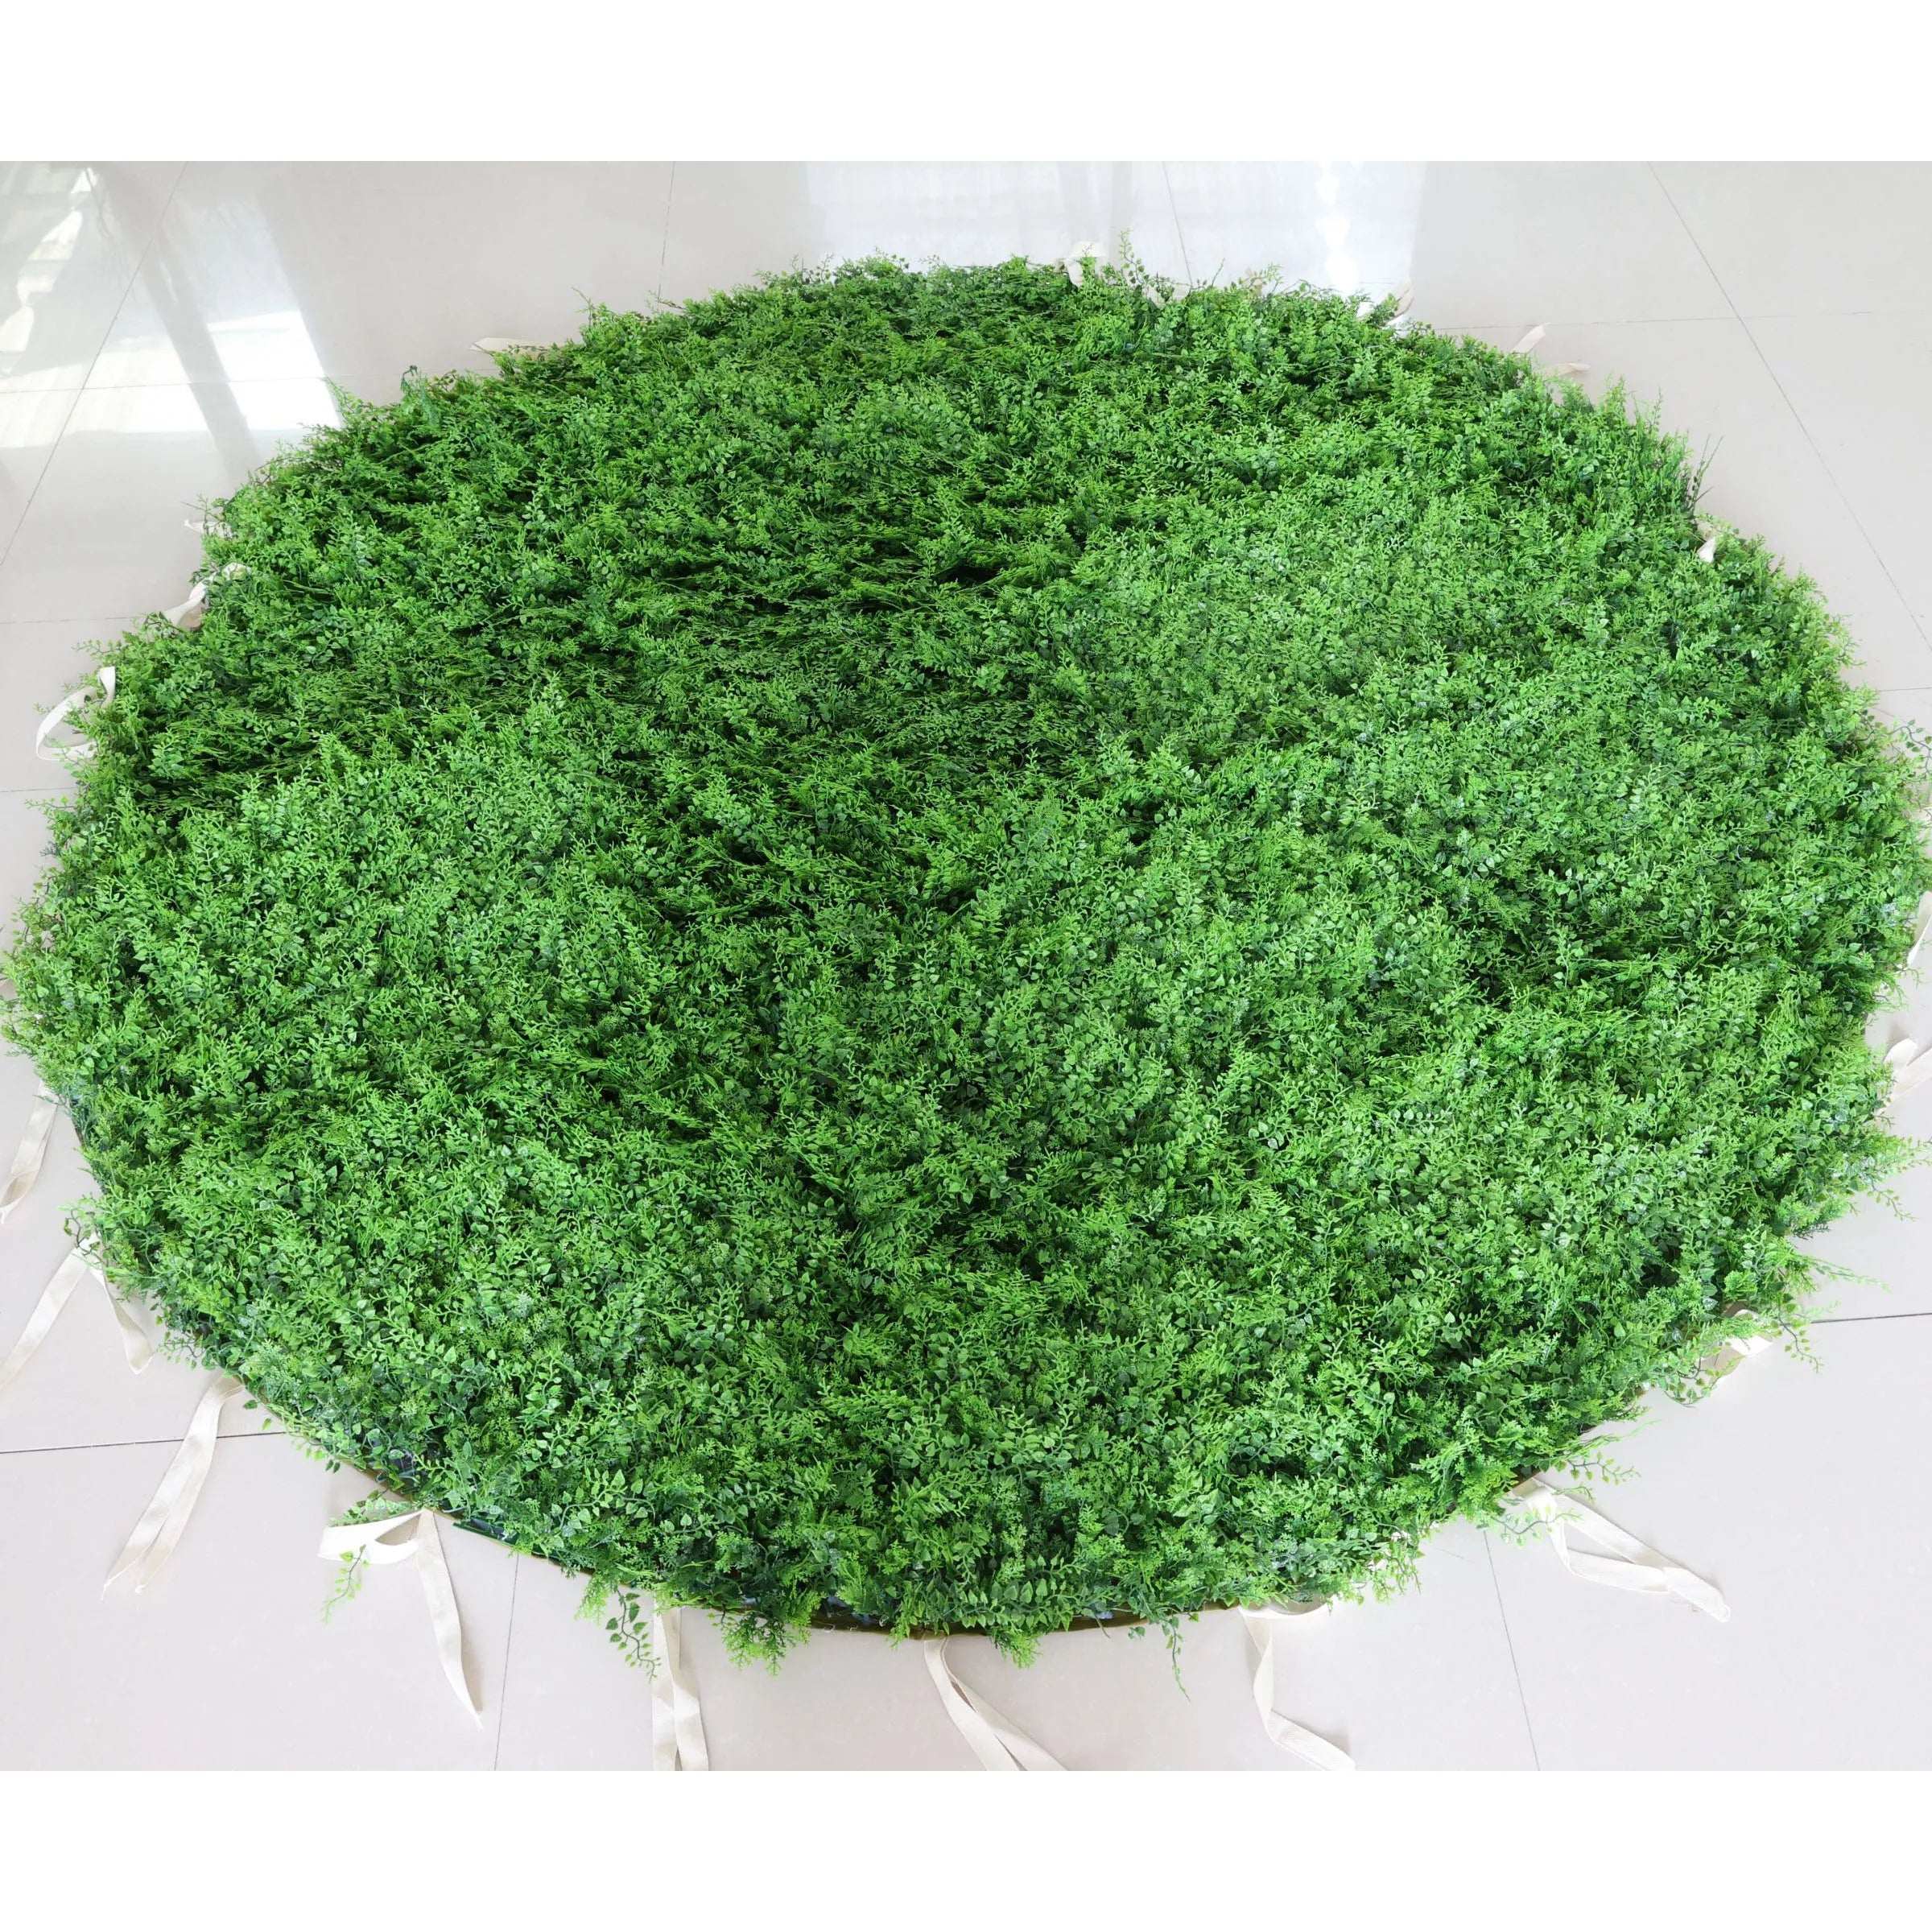 Valar Flowers Roll Up Fabric Artificial Vivid Green Grass Wall Wedding Backdrop, Floral Party Decor, Event Photography-VF-086-2-2